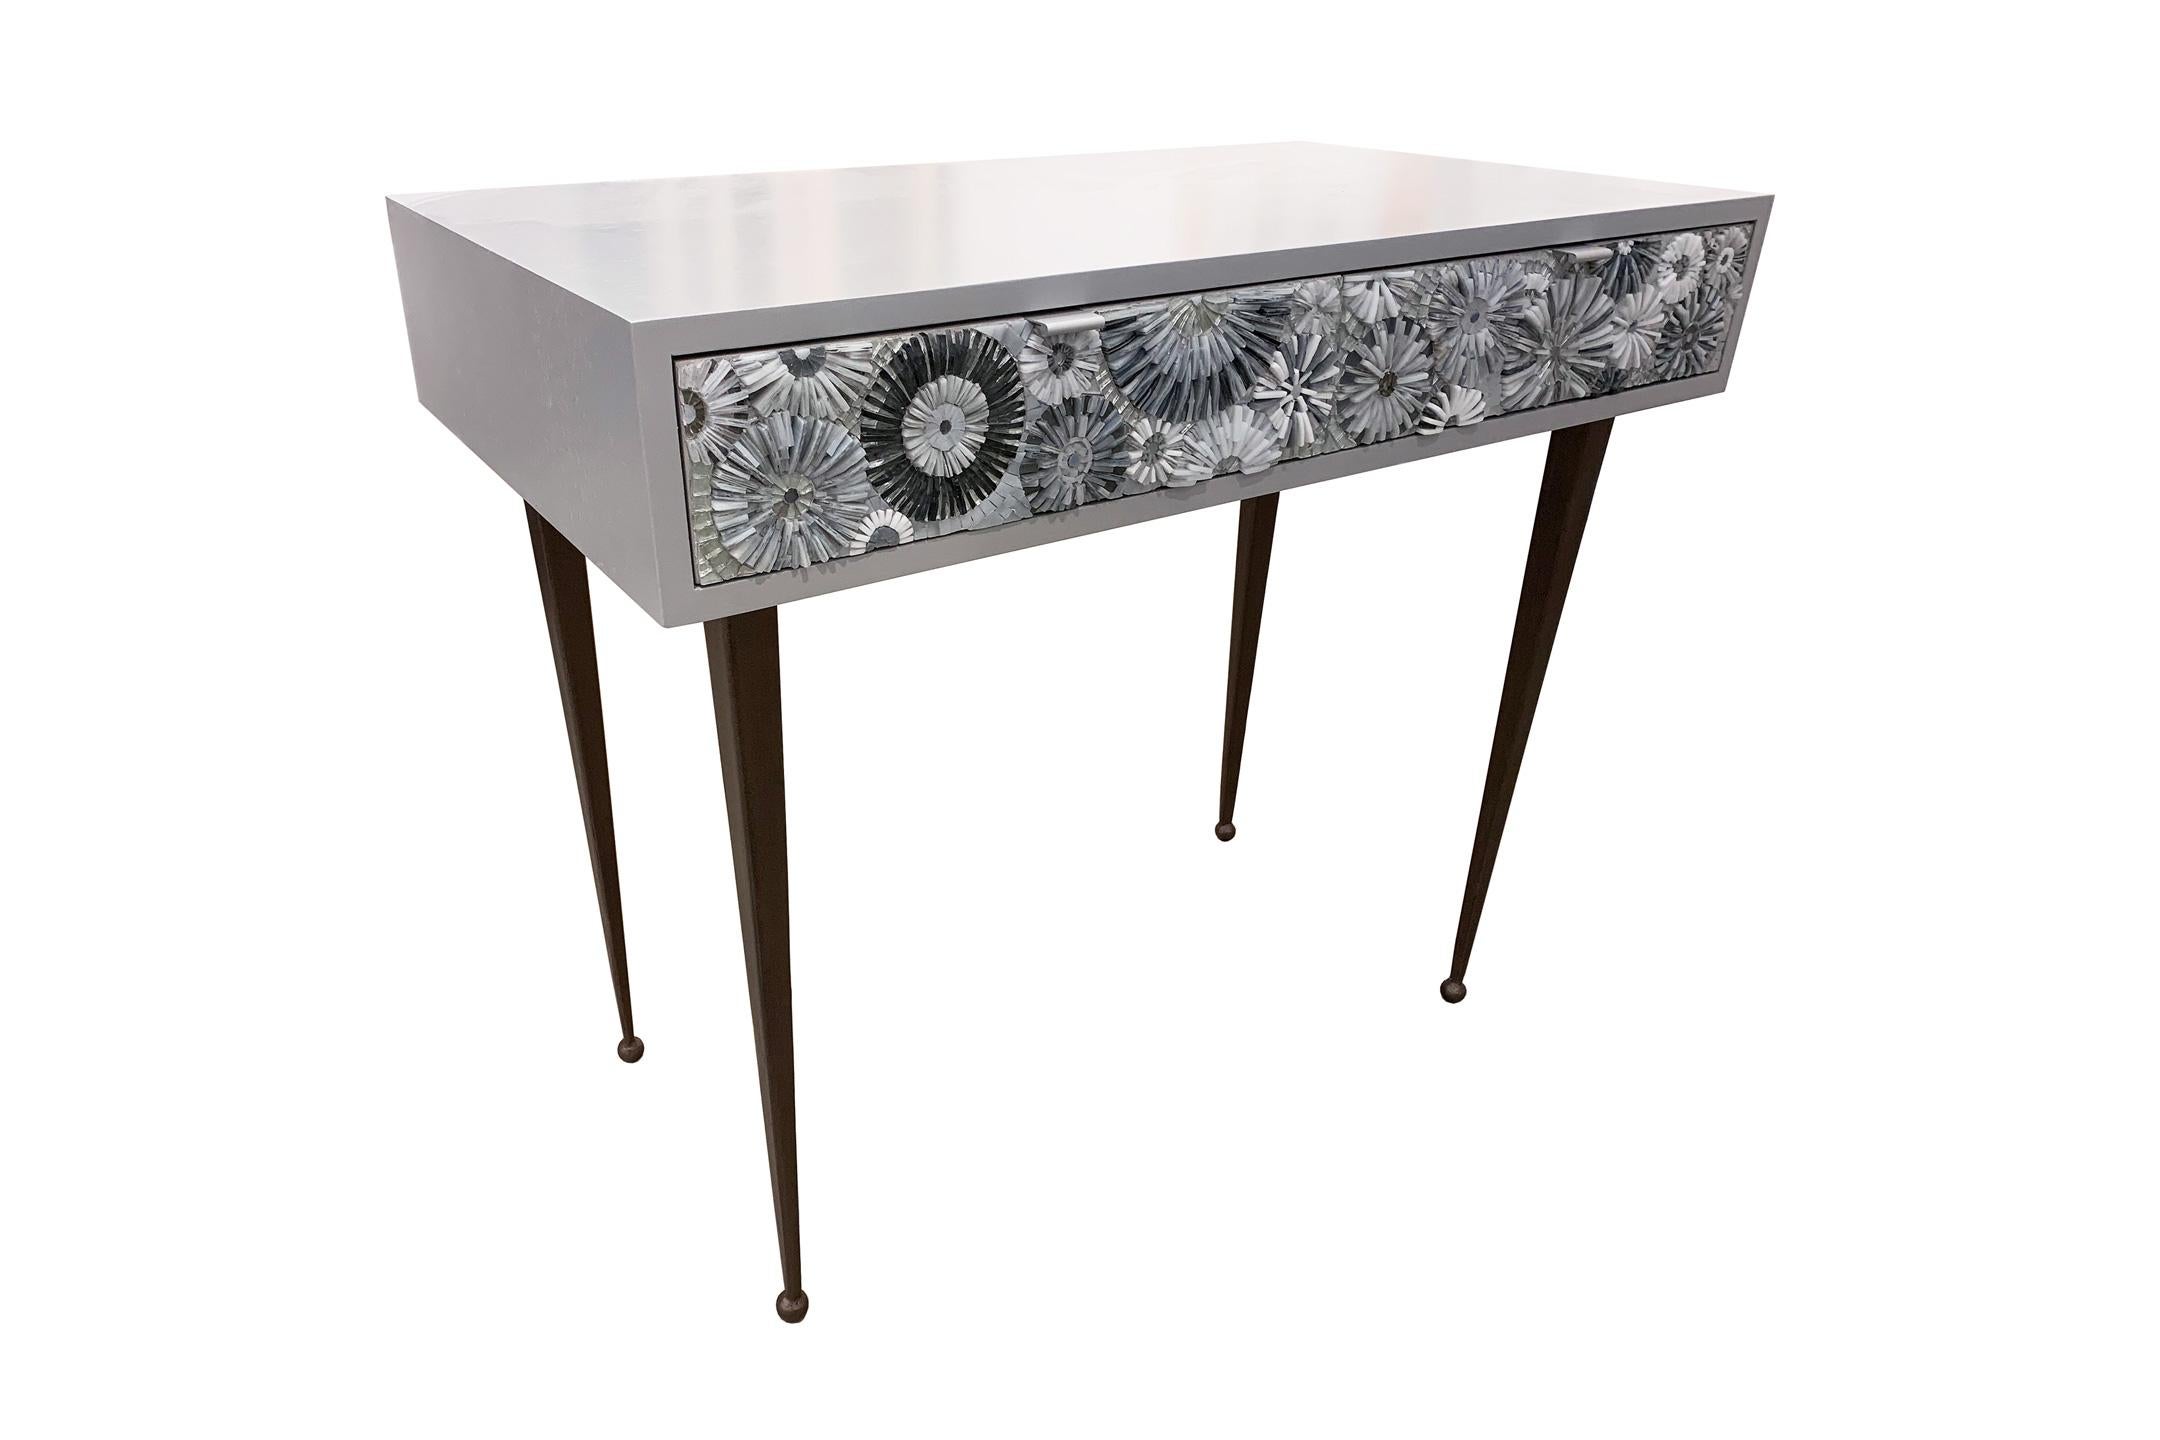 The Pavia Blossom desk/vanity by Ercole Home has a 2-drawer, with a sky gray wood finish on oak.
Handcut glass mosaics in bluegreen and turquoise decorate the drawer fronts in blossom (3-Dimensional flowers) pattern.
There are two aluminium pulls